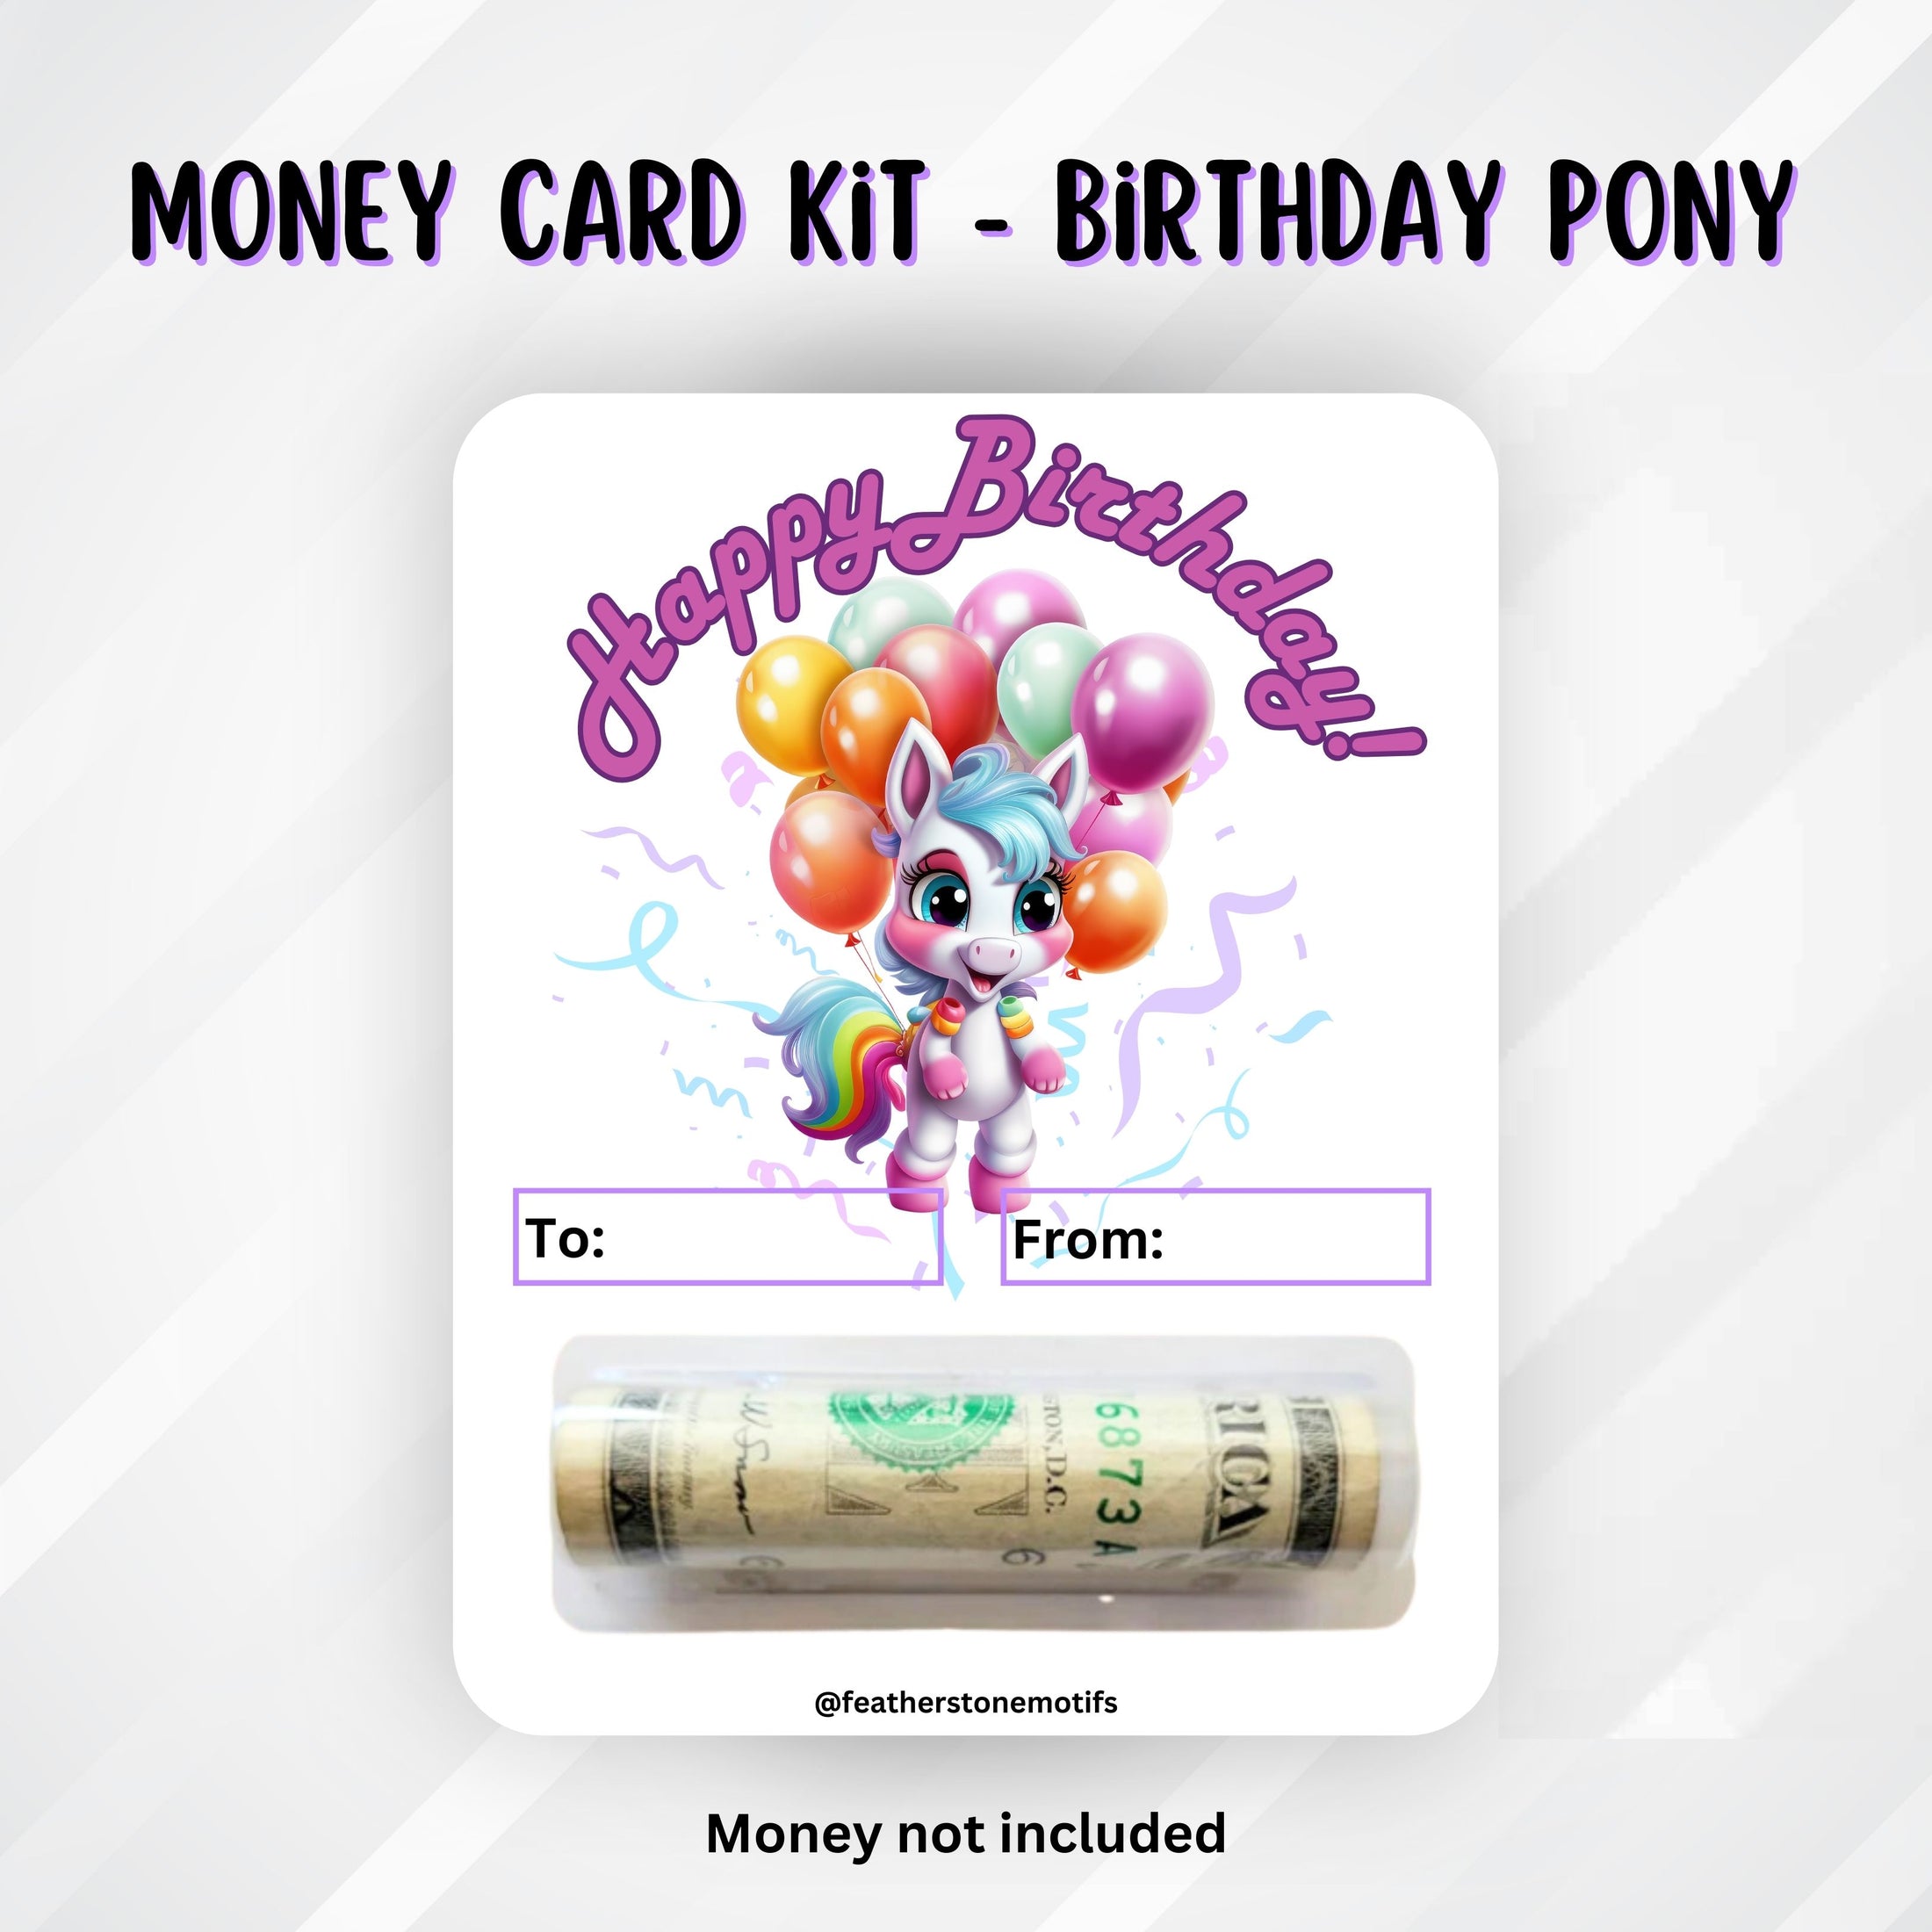 This image shows the money tube attached to the Birthday Pony money card.